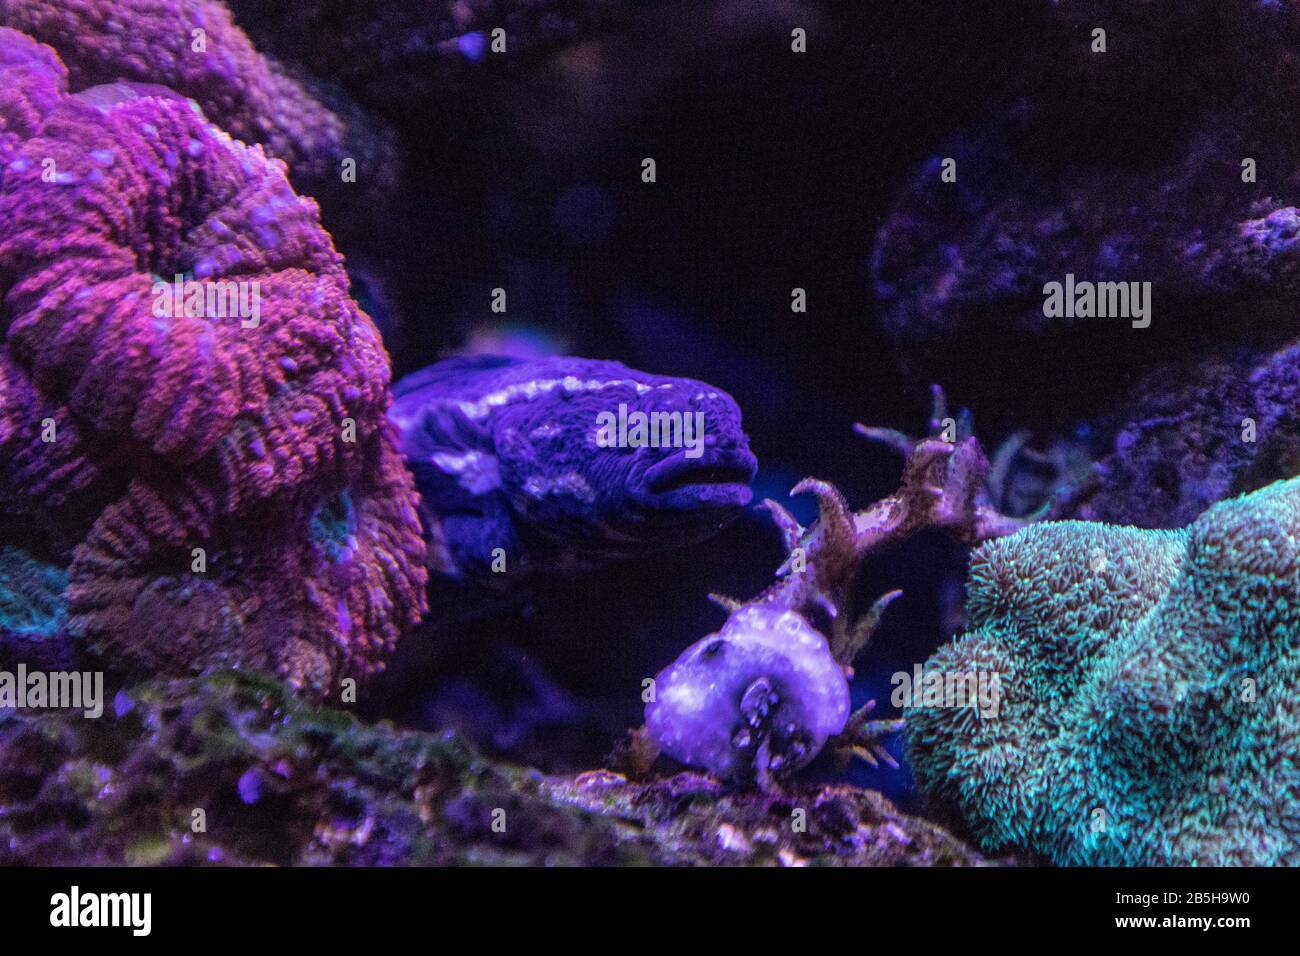 Convict blenny fish Pholidichthys leucotaenia hides in a coral reef. Stock Photo